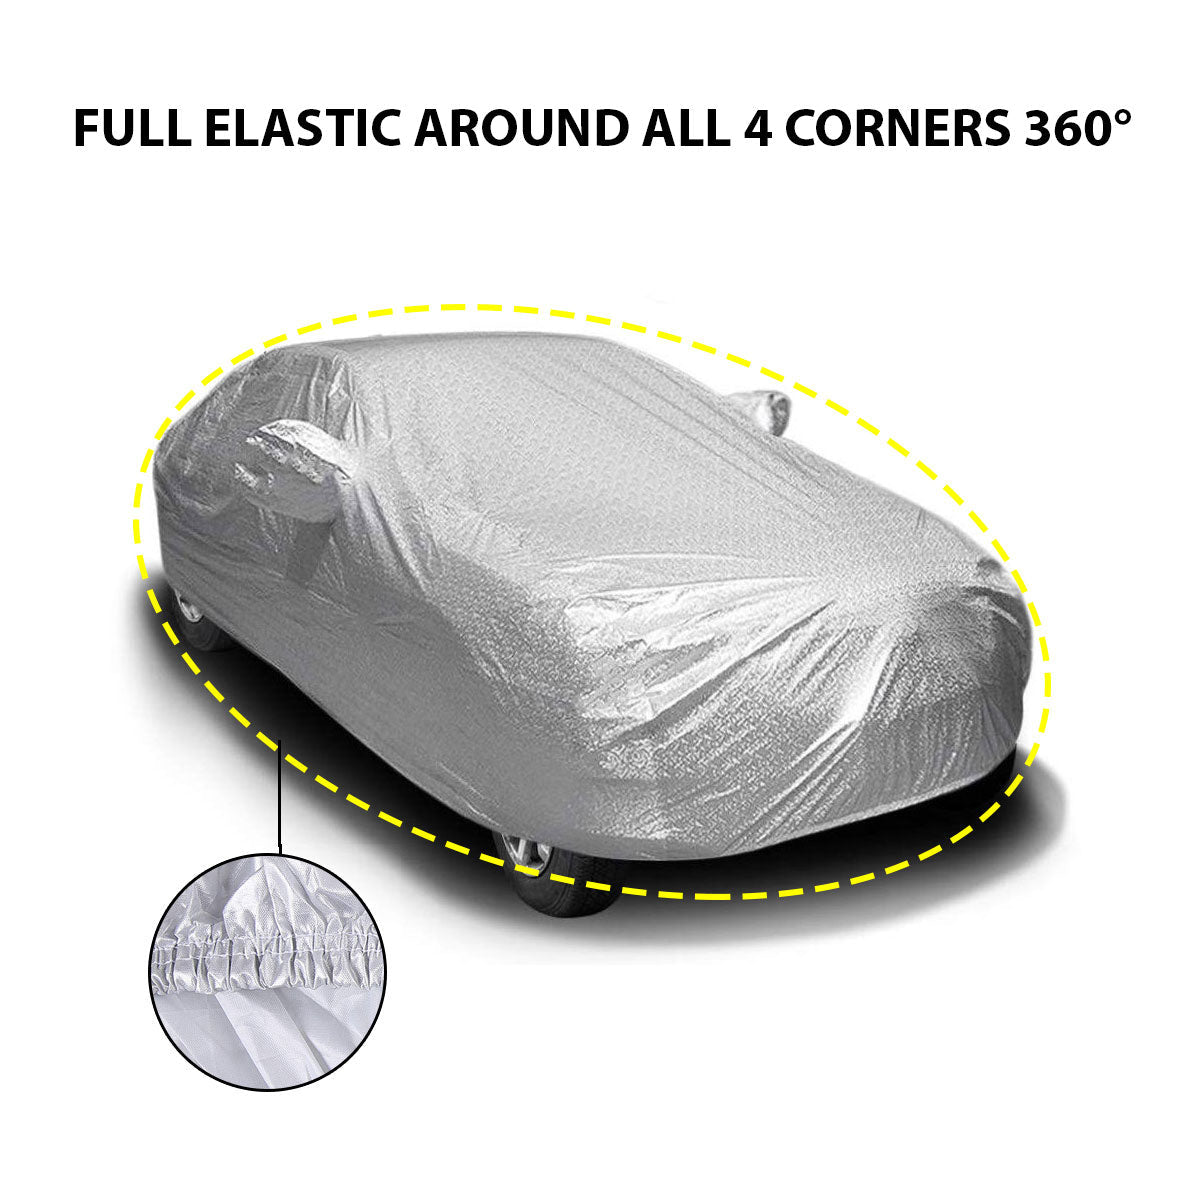 Oshotto Spyro Silver Anti Reflective, dustproof and Water Proof Car Body Cover with Mirror Pockets For Nissan Magnite